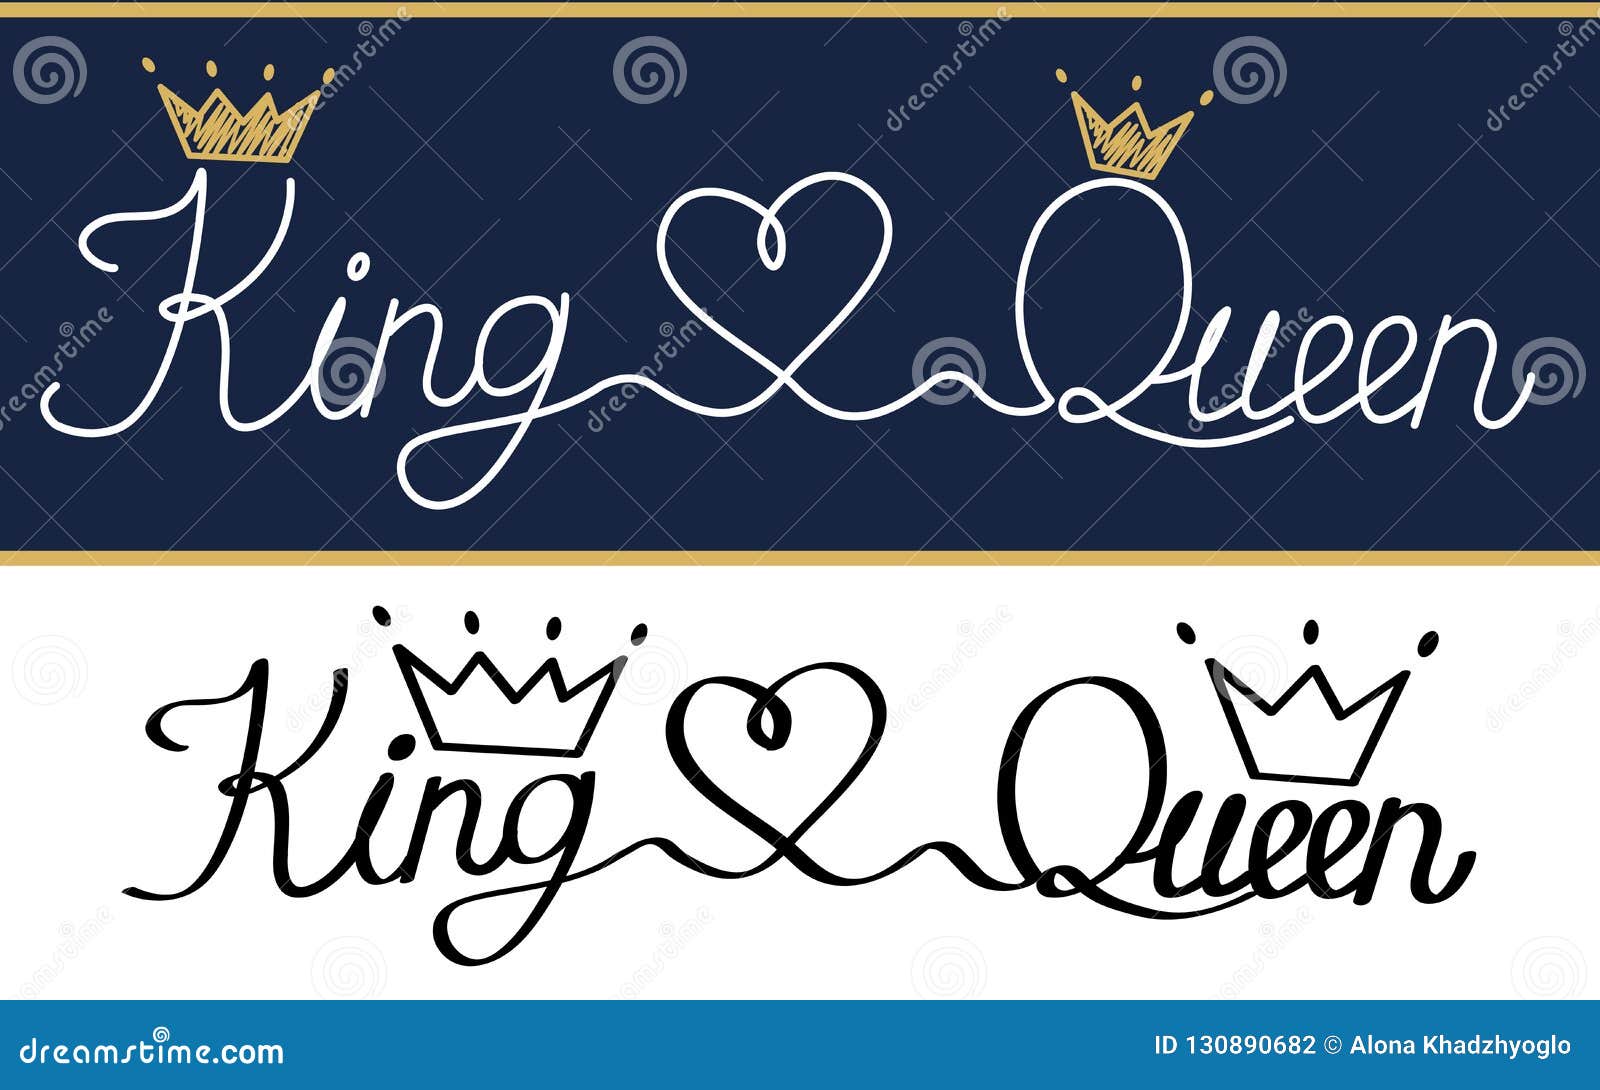 King And Queen Couple Design Black Text And Gold Crown Isolated On